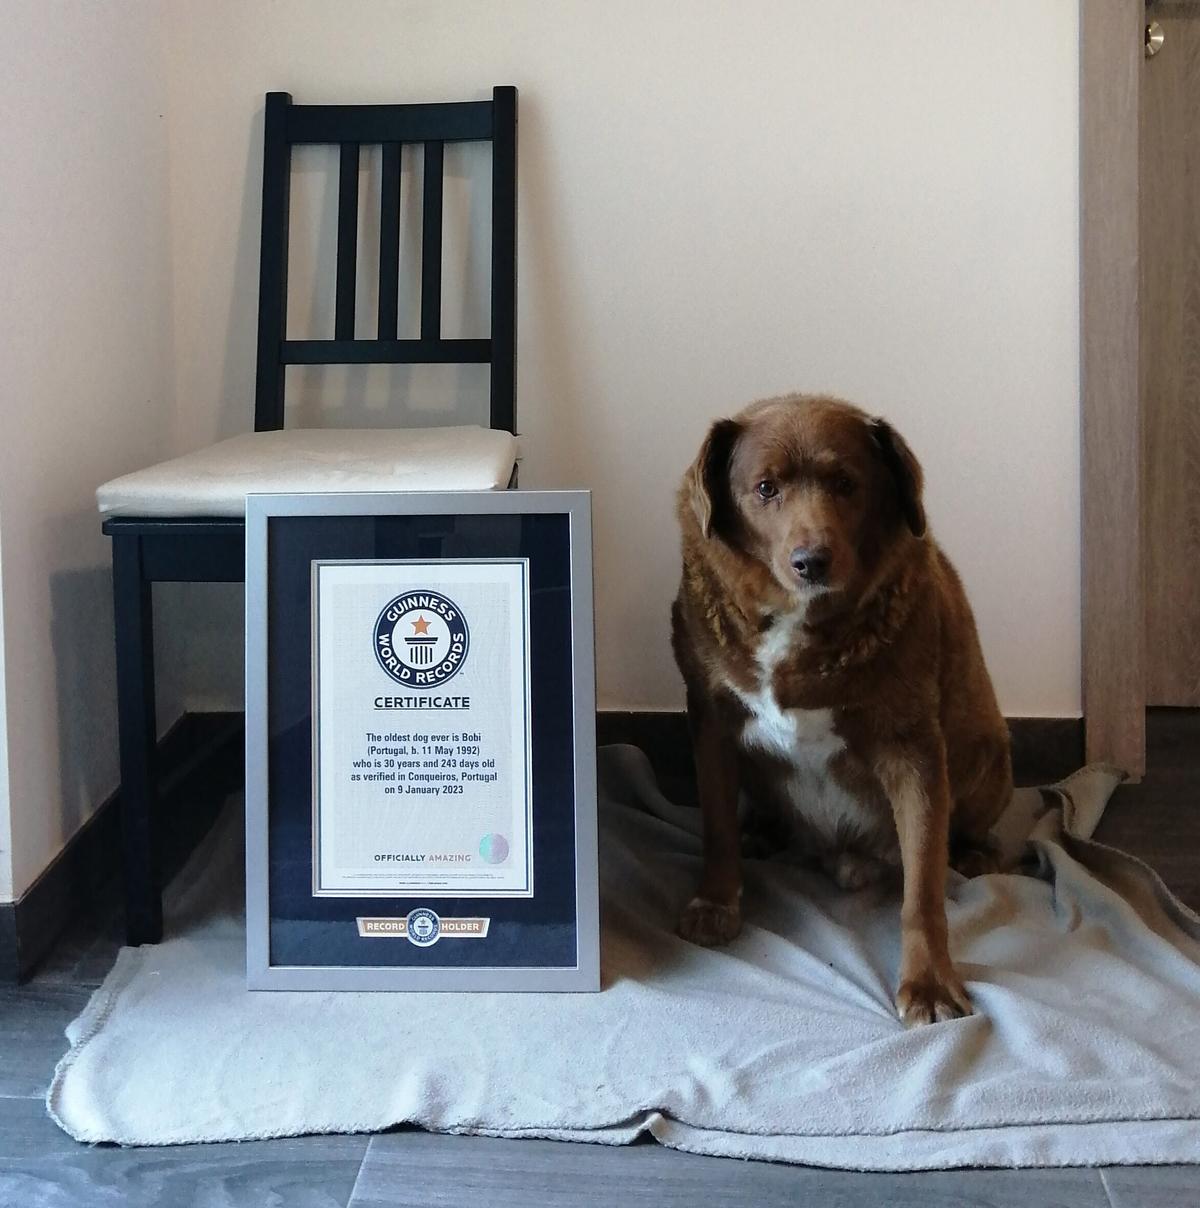 Bobi claimed the Guinness World Record for Oldest Dog Living and Oldest Dog Ever. (Courtesy of <a href="https://guinnessworldrecords.com/">Guinness World Records</a>)